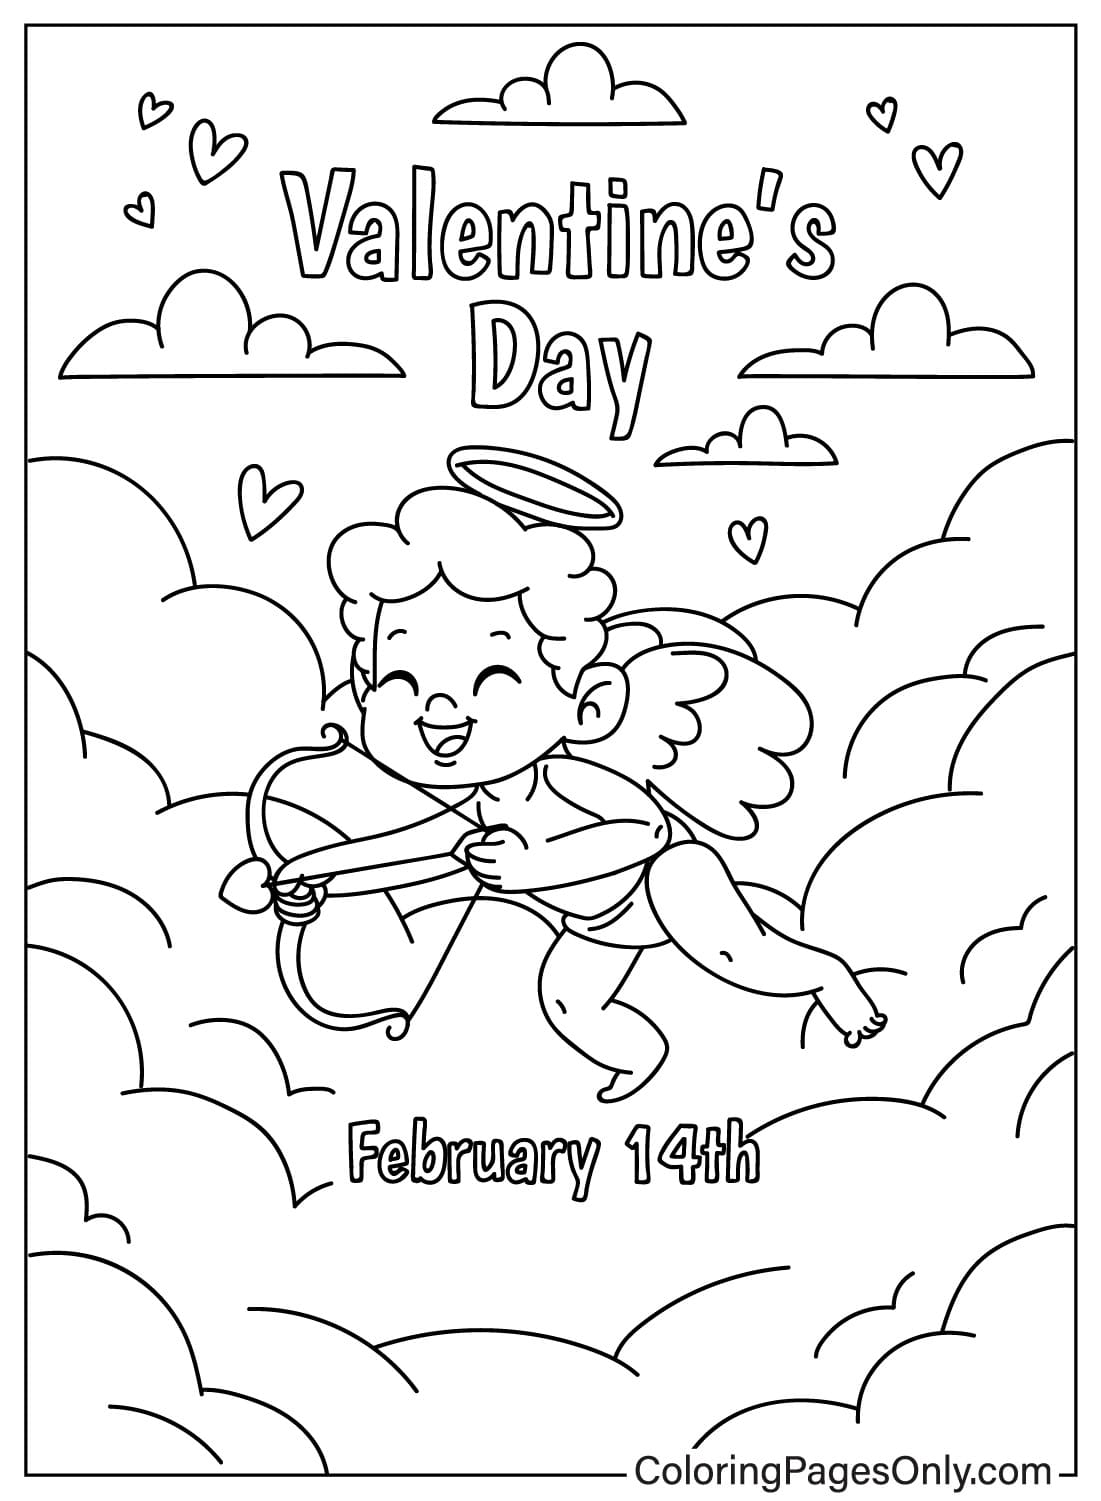 Cupid Coloring Page Valentine’s Day from Cupid